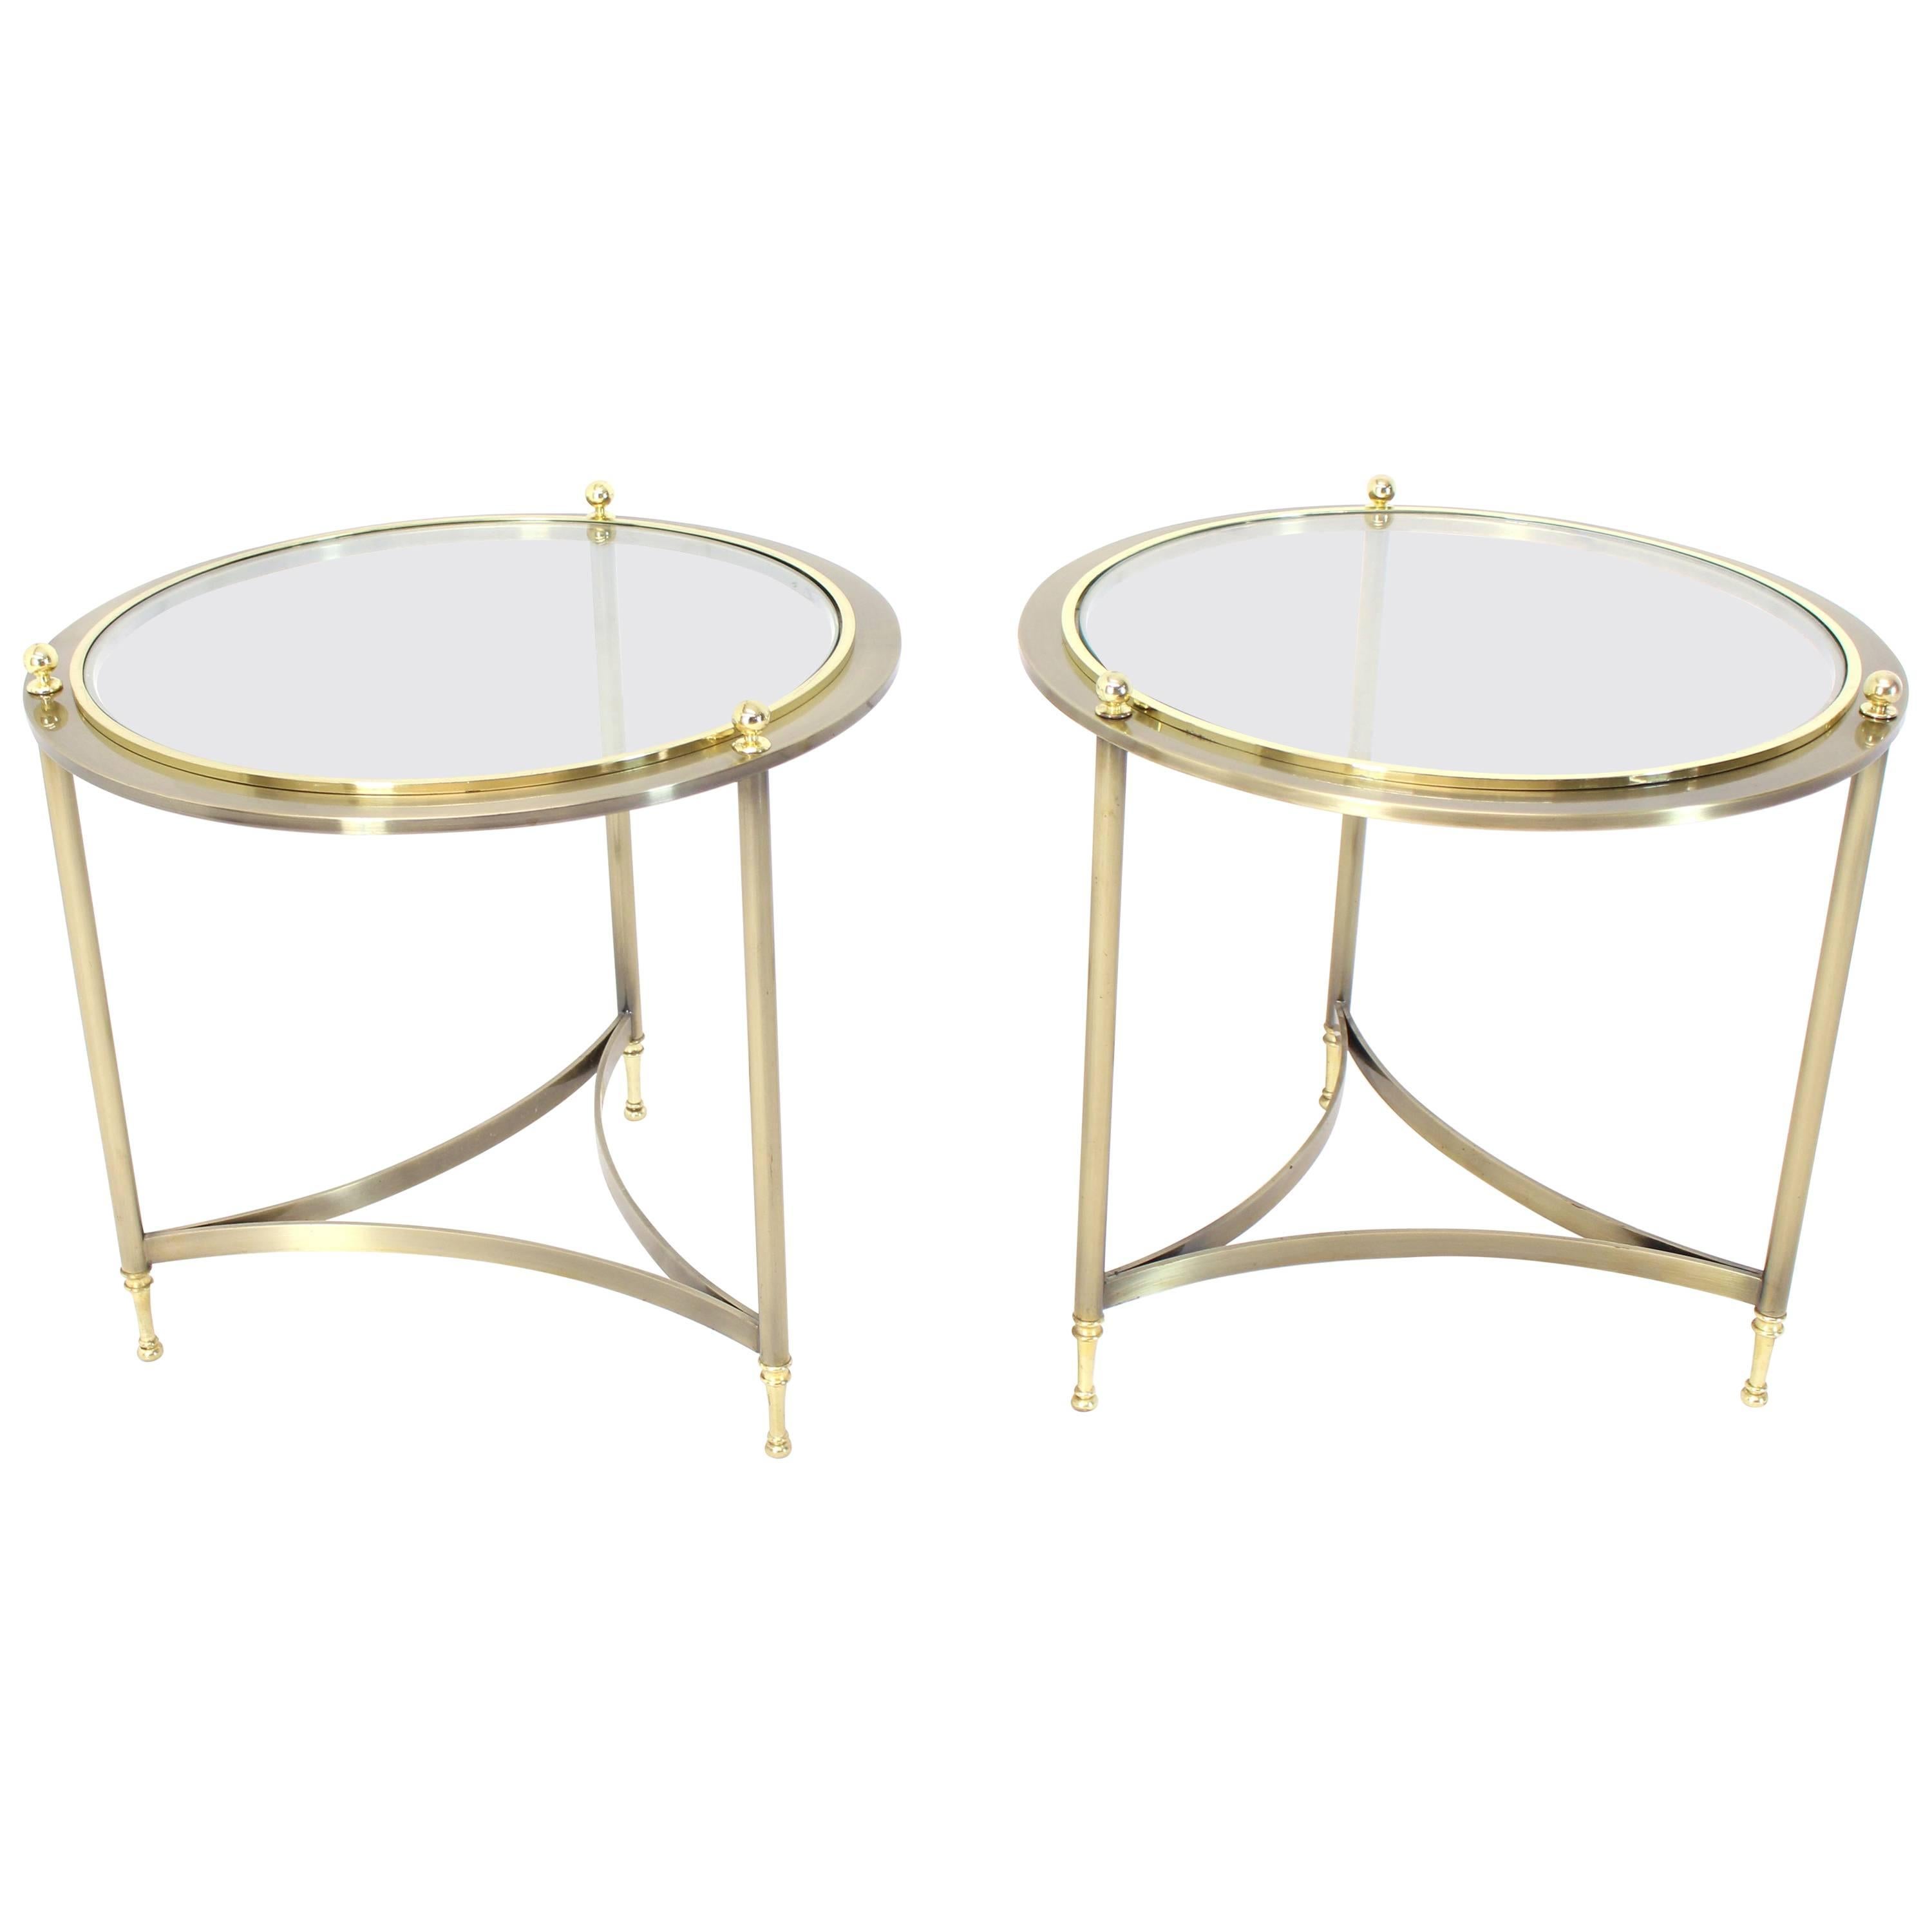 Pair of Round Side End Tables with Glass Tops by DIA